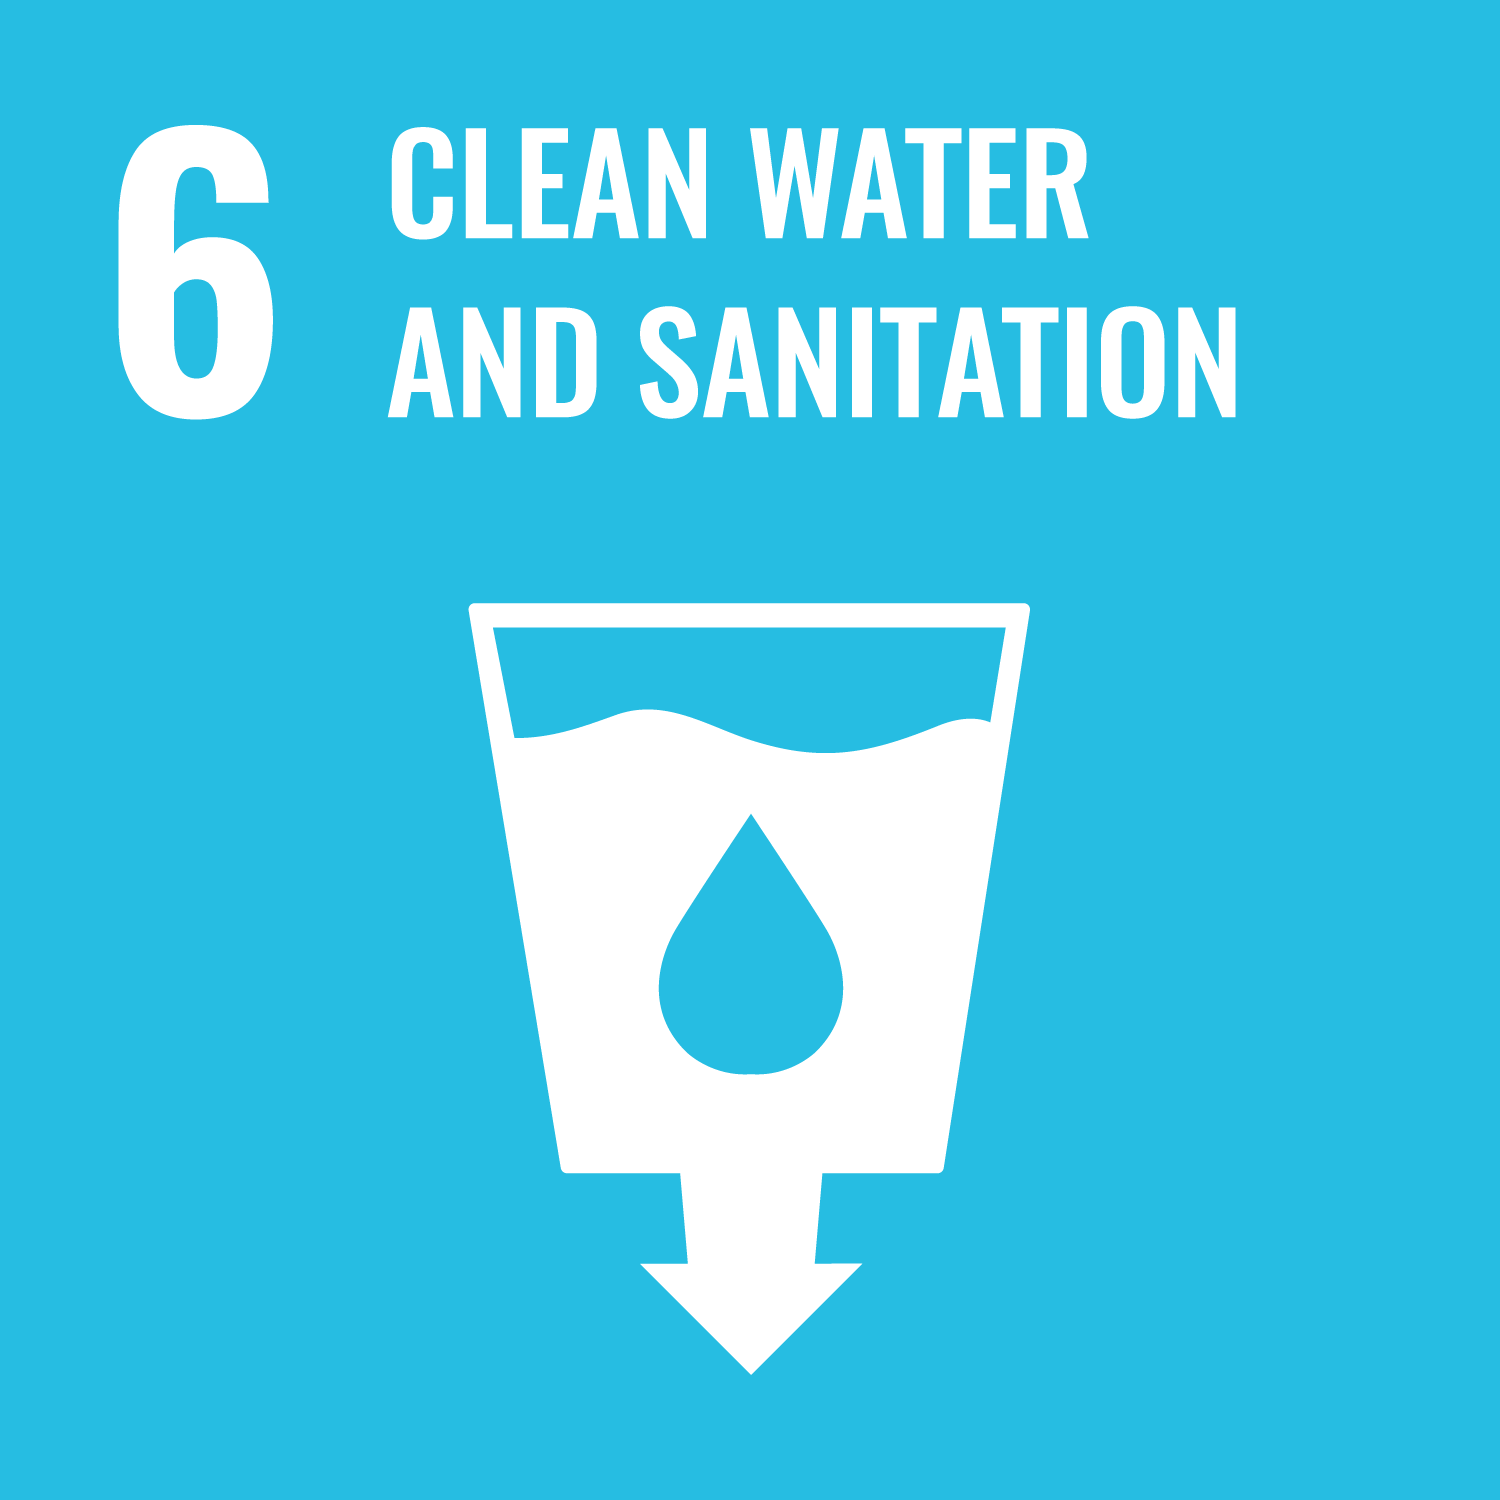 Clean water and sanitation.